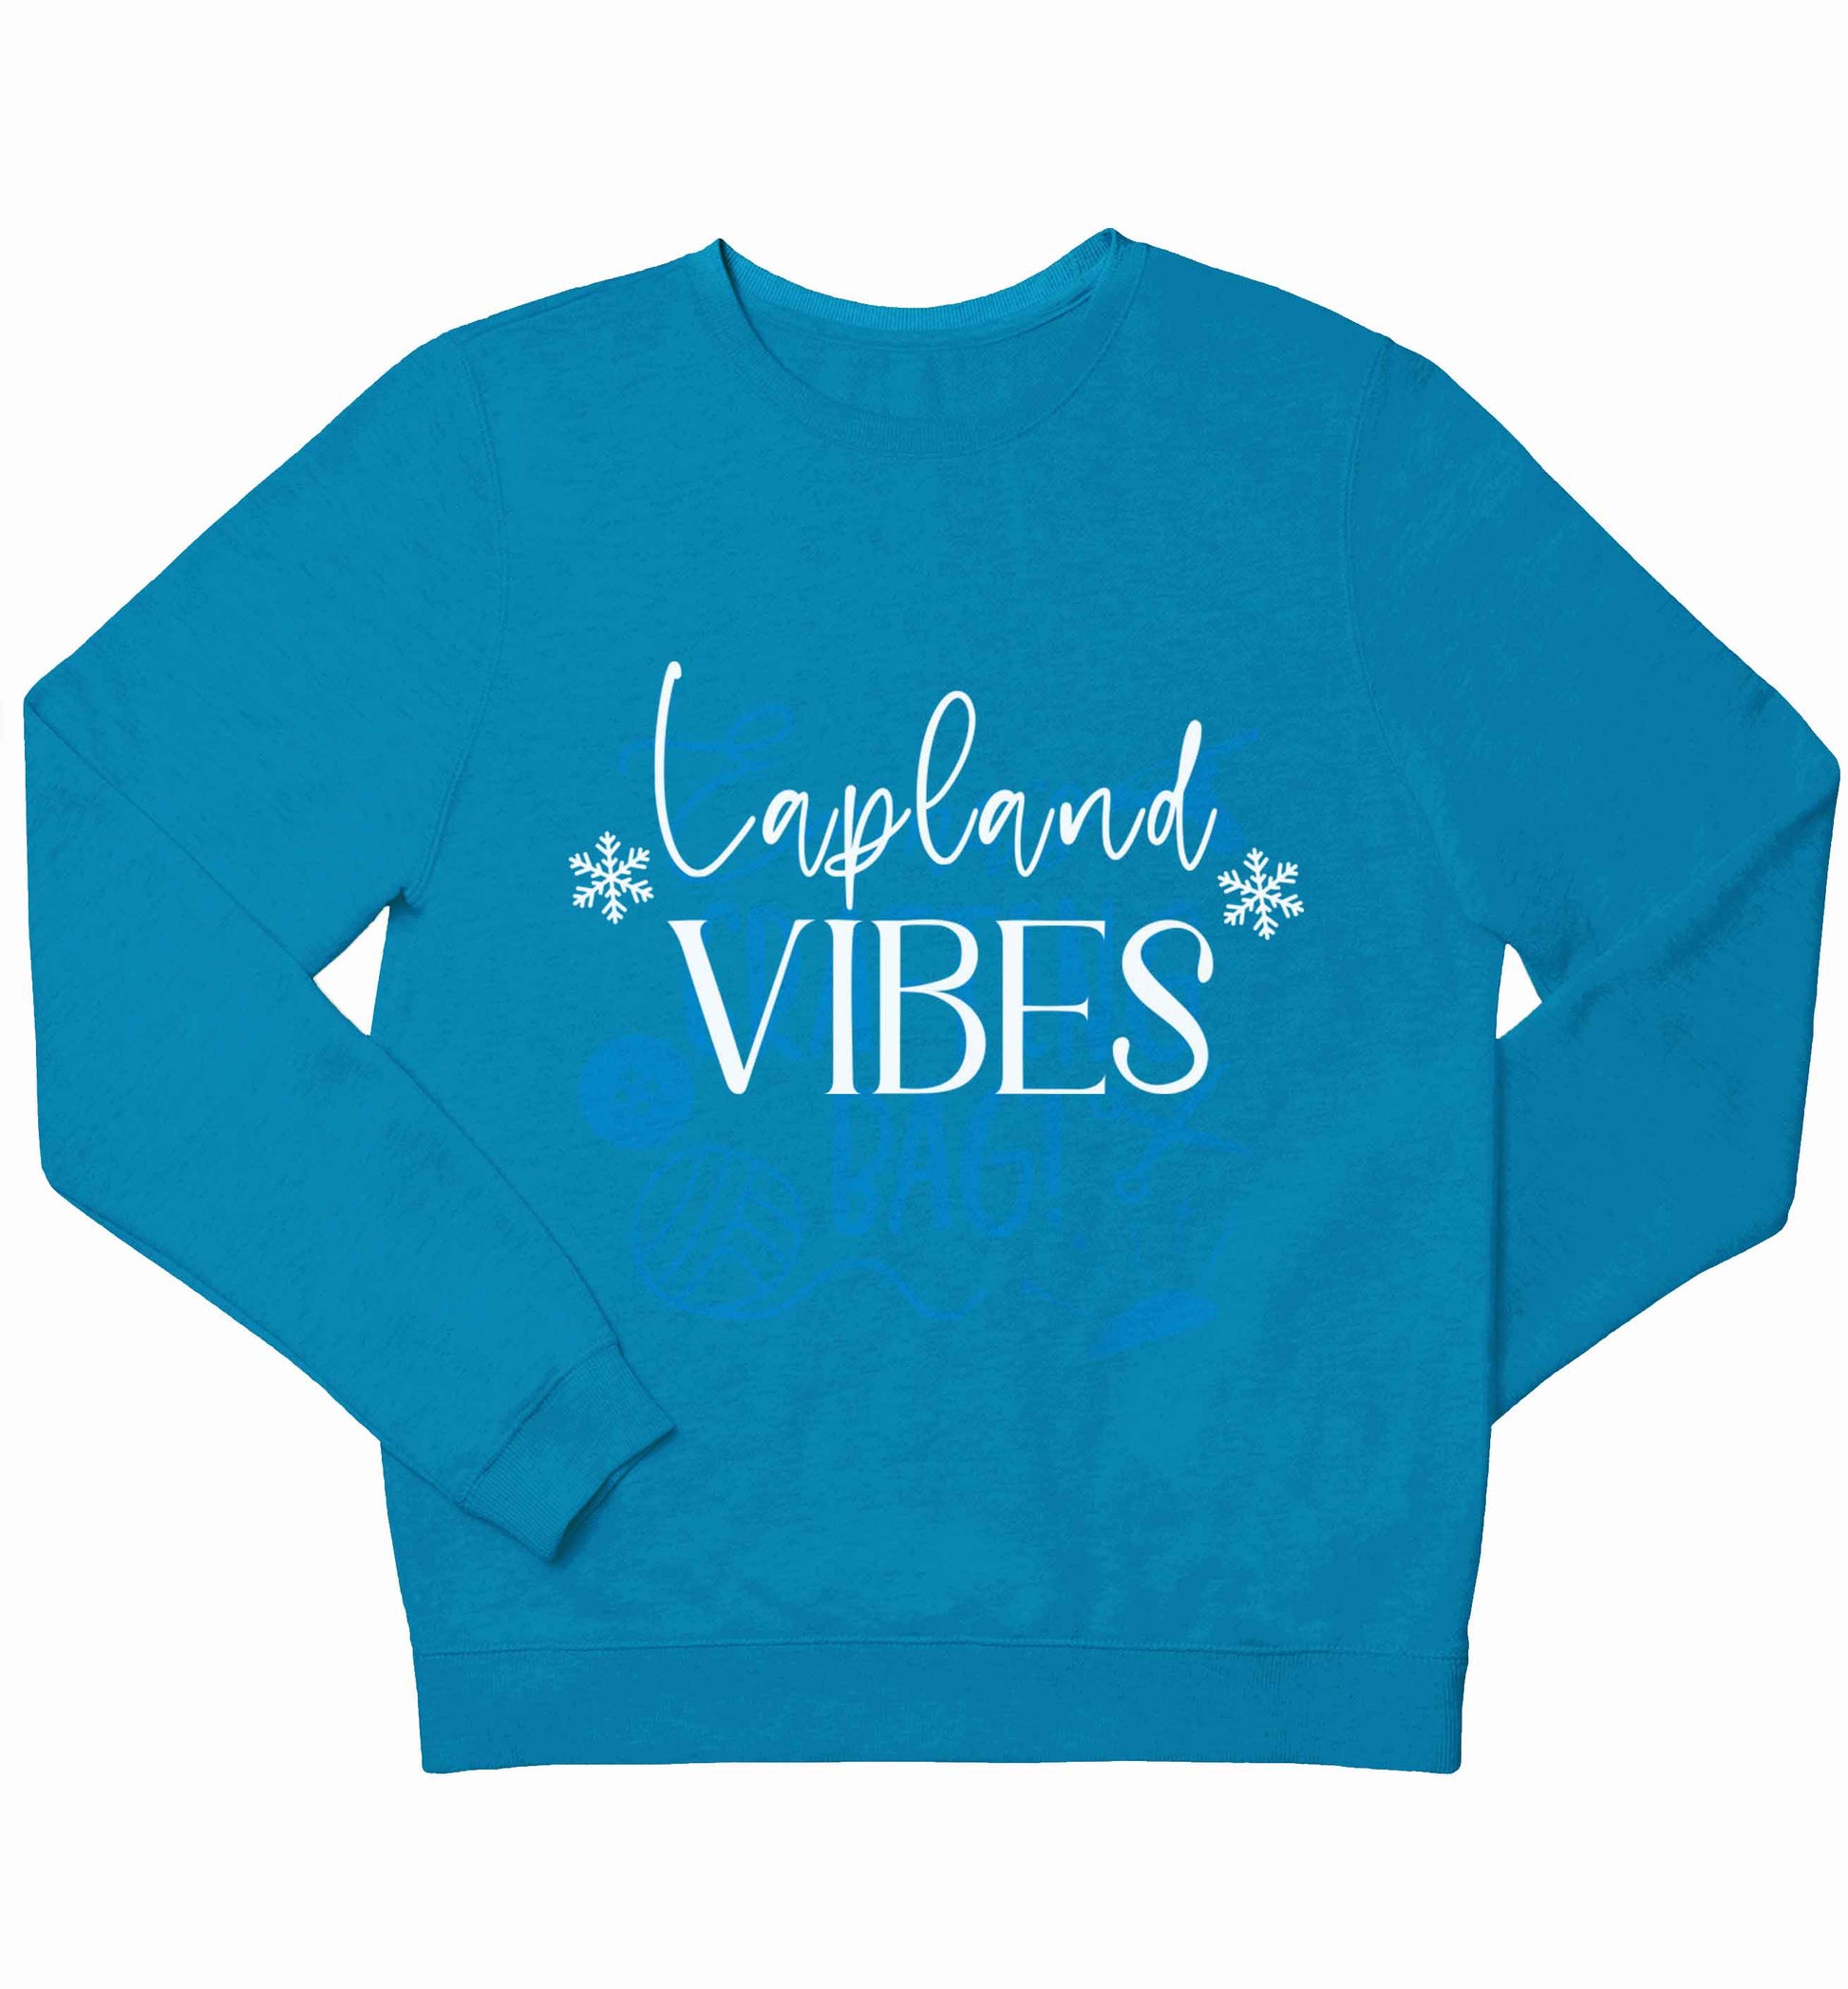 Lapland vibes children's blue sweater 12-13 Years